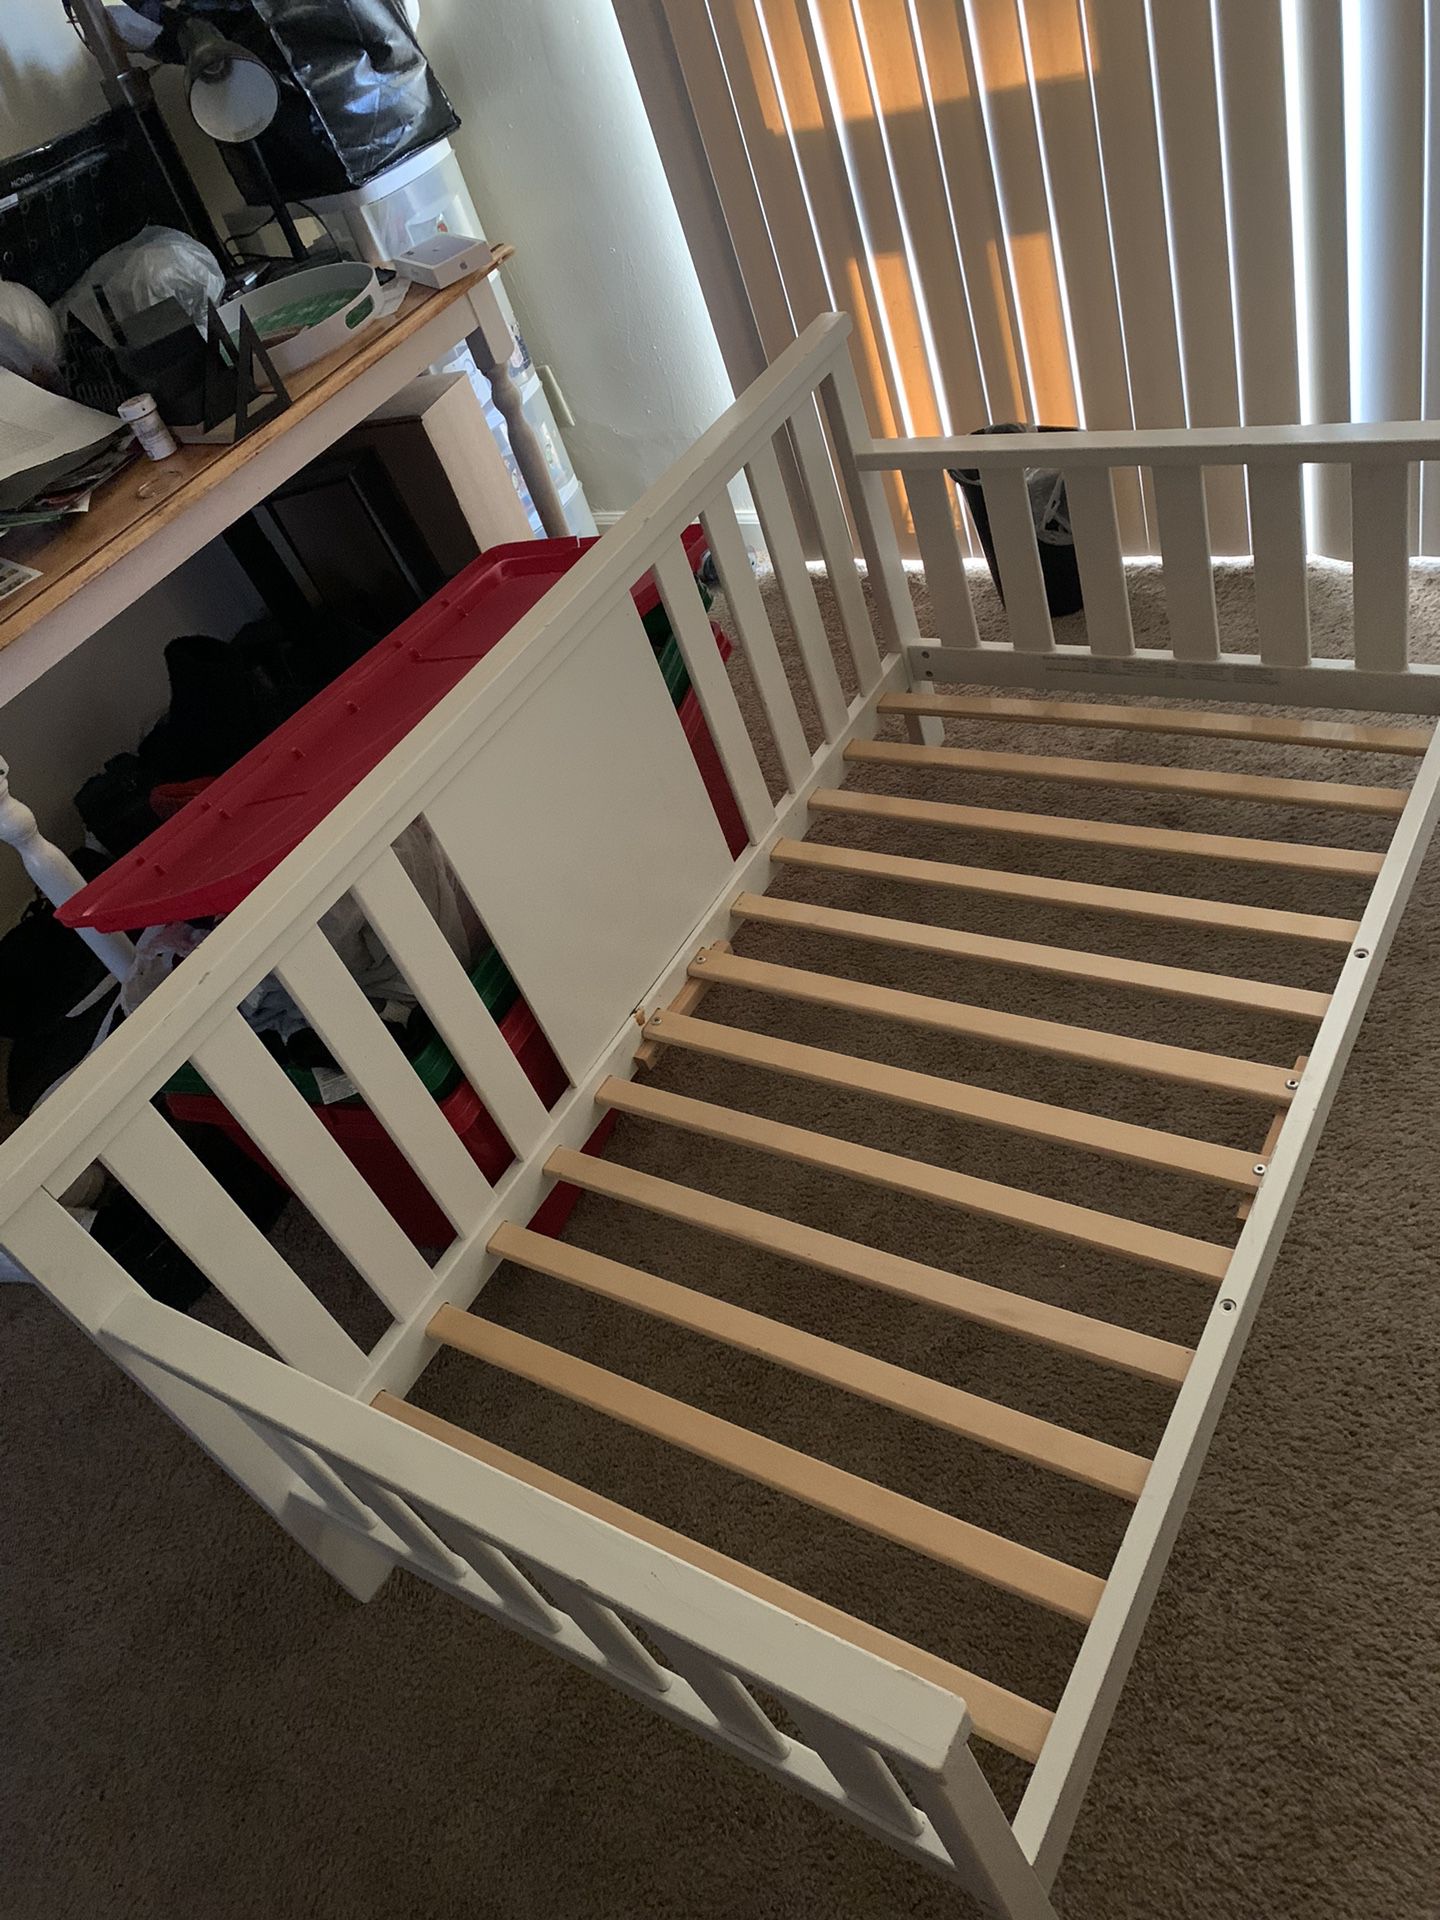 Brand New Toddler, Daybed Crib Mattress, Not Included